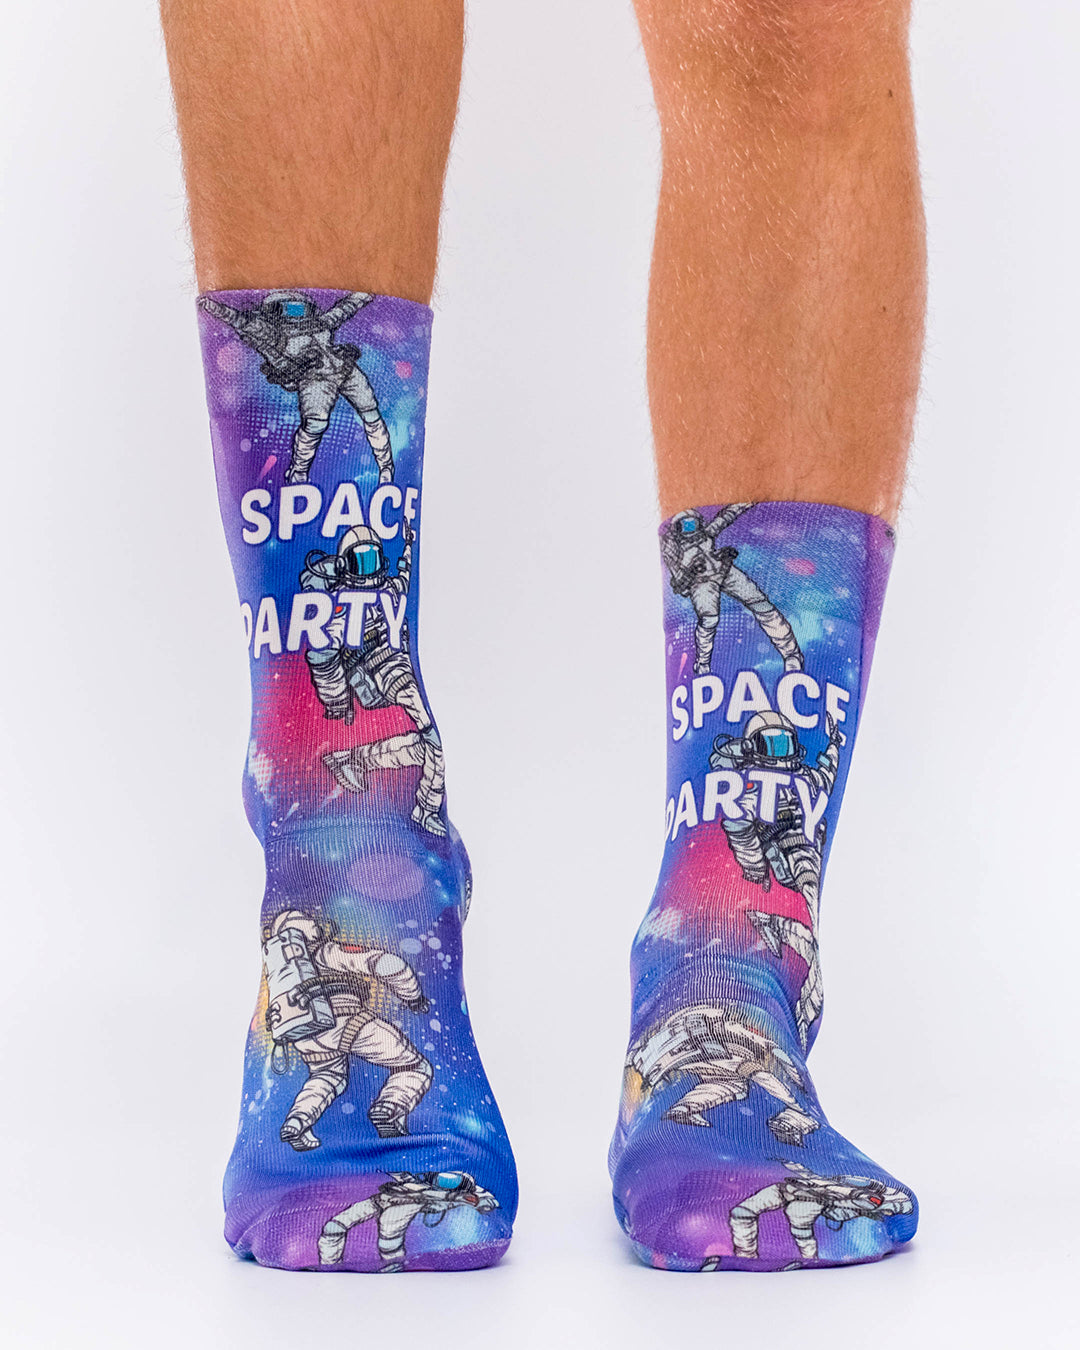 Space Party Man Sock